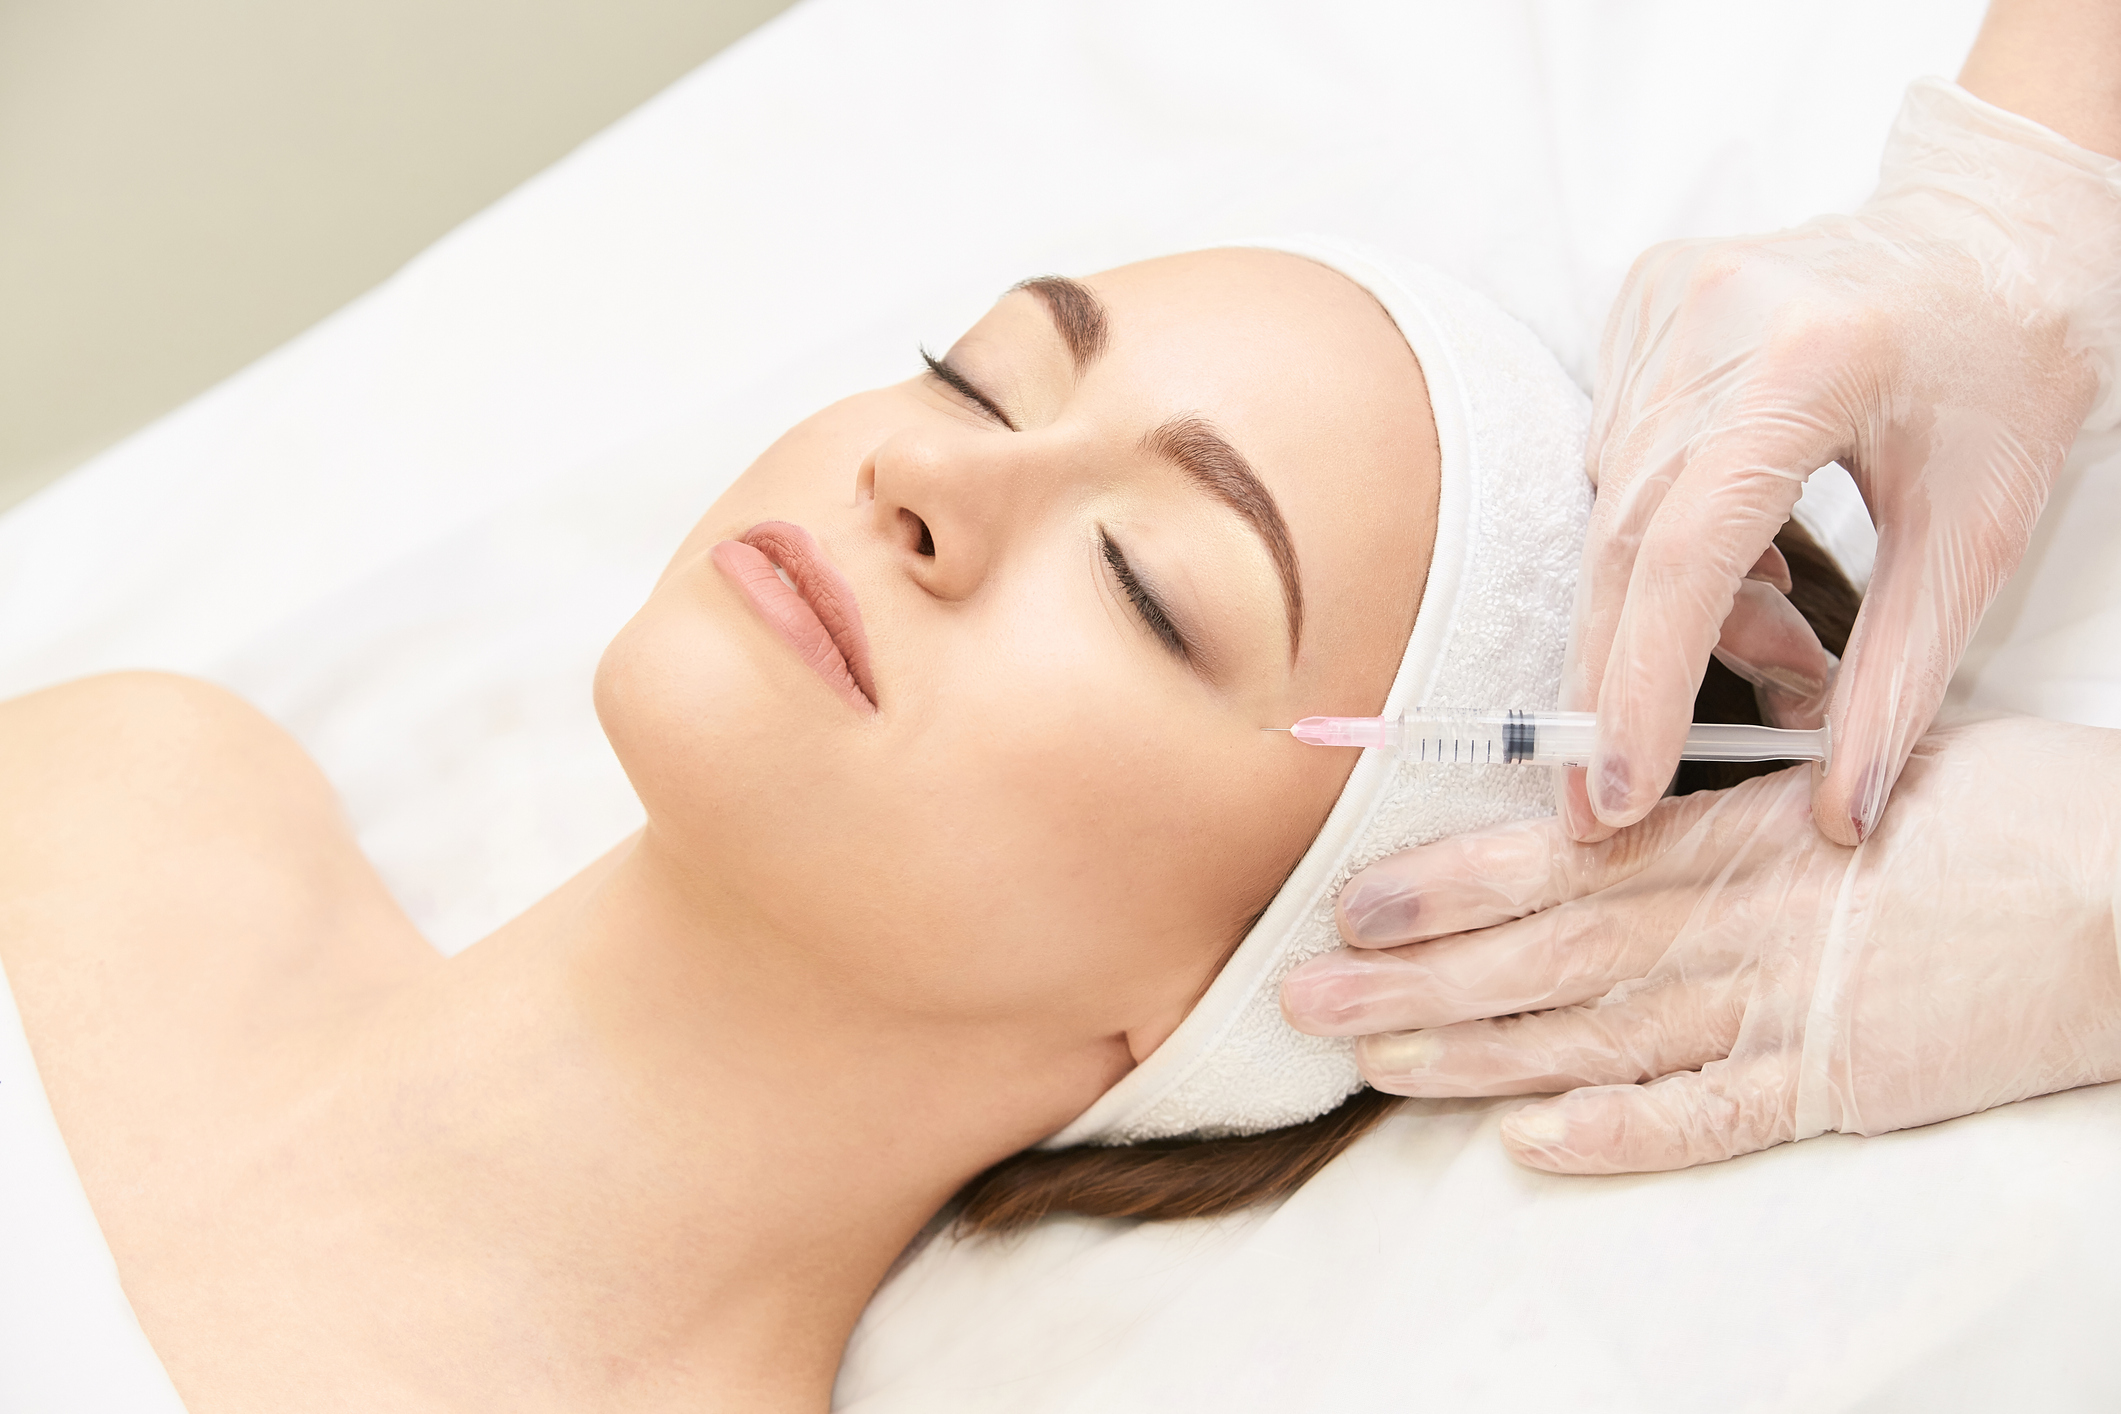 Facing Staffing Shortages in Your Dermatology or Med Spa?